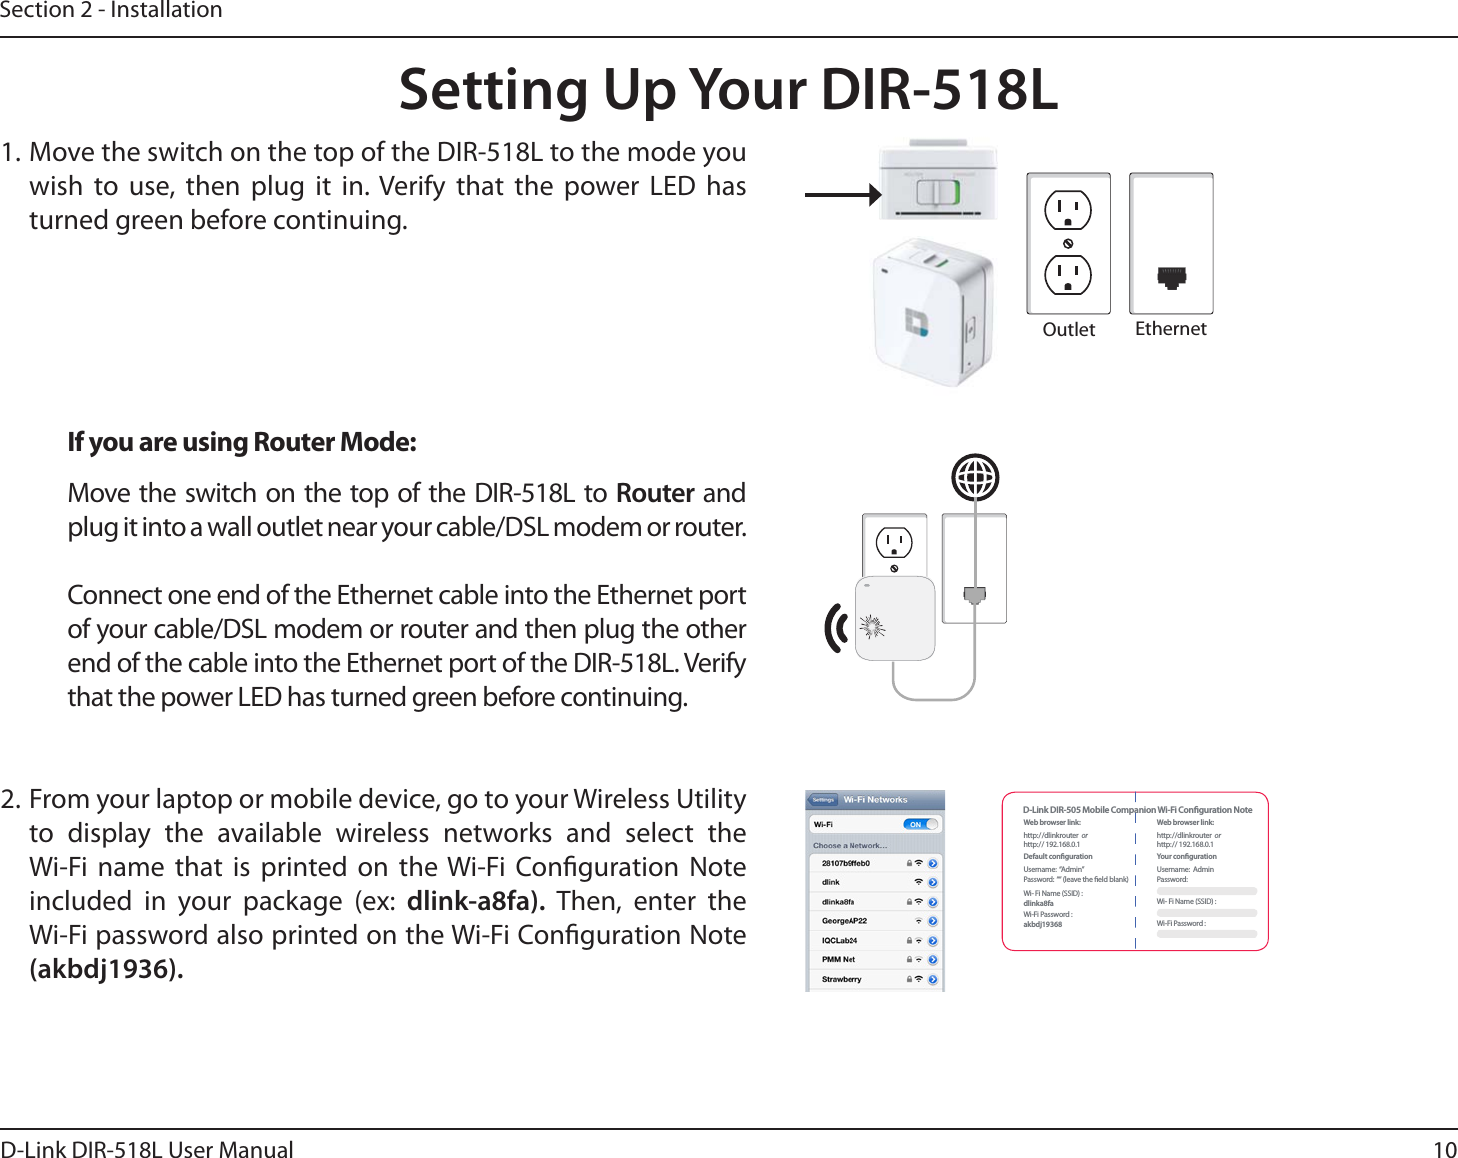 10D-Link DIR-518L User ManualSection 2 - InstallationSetting Up Your DIR-518L1. Move the switch on the top of the DIR-518L to the mode you wish to use, then plug it in. Verify that the power LED has turned green before continuing.If you are using Router Mode:Move the switch on the top of the DIR-518L to Router and plug it into a wall outlet near your cable/DSL modem or router.Connect one end of the Ethernet cable into the Ethernet port of your cable/DSL modem or router and then plug the other end of the cable into the Ethernet port of the DIR-518L. Verify that the power LED has turned green before continuing. 2. From your laptop or mobile device, go to your Wireless Utility to display the available wireless networks and select the Wi-Fi name that is printed on the Wi-Fi Conguration Note included in your package (ex: dlink-a8fa).  Then, enter the Wi-Fi password also printed on the Wi-Fi Conguration Note (akbdj1936).Outlet EthernetWeb browser link:http:/ /dlinkrouter  or  http:// 192.168.0.1Default congurationUsername:  “Admin”Password:  ““ (leave the eld blank)Wi- Fi Name (SSID) : dlinka8faWi-Fi Password : akbdj19368Web browser link:http://dlinkrouter  or  http:// 192.168.0.1Your congurationUsername:  AdminPassword:Wi- Fi Name (SSID) : Wi-Fi Password : D-Link DIR-505 Mobile Companion Wi-Fi Conguration Note